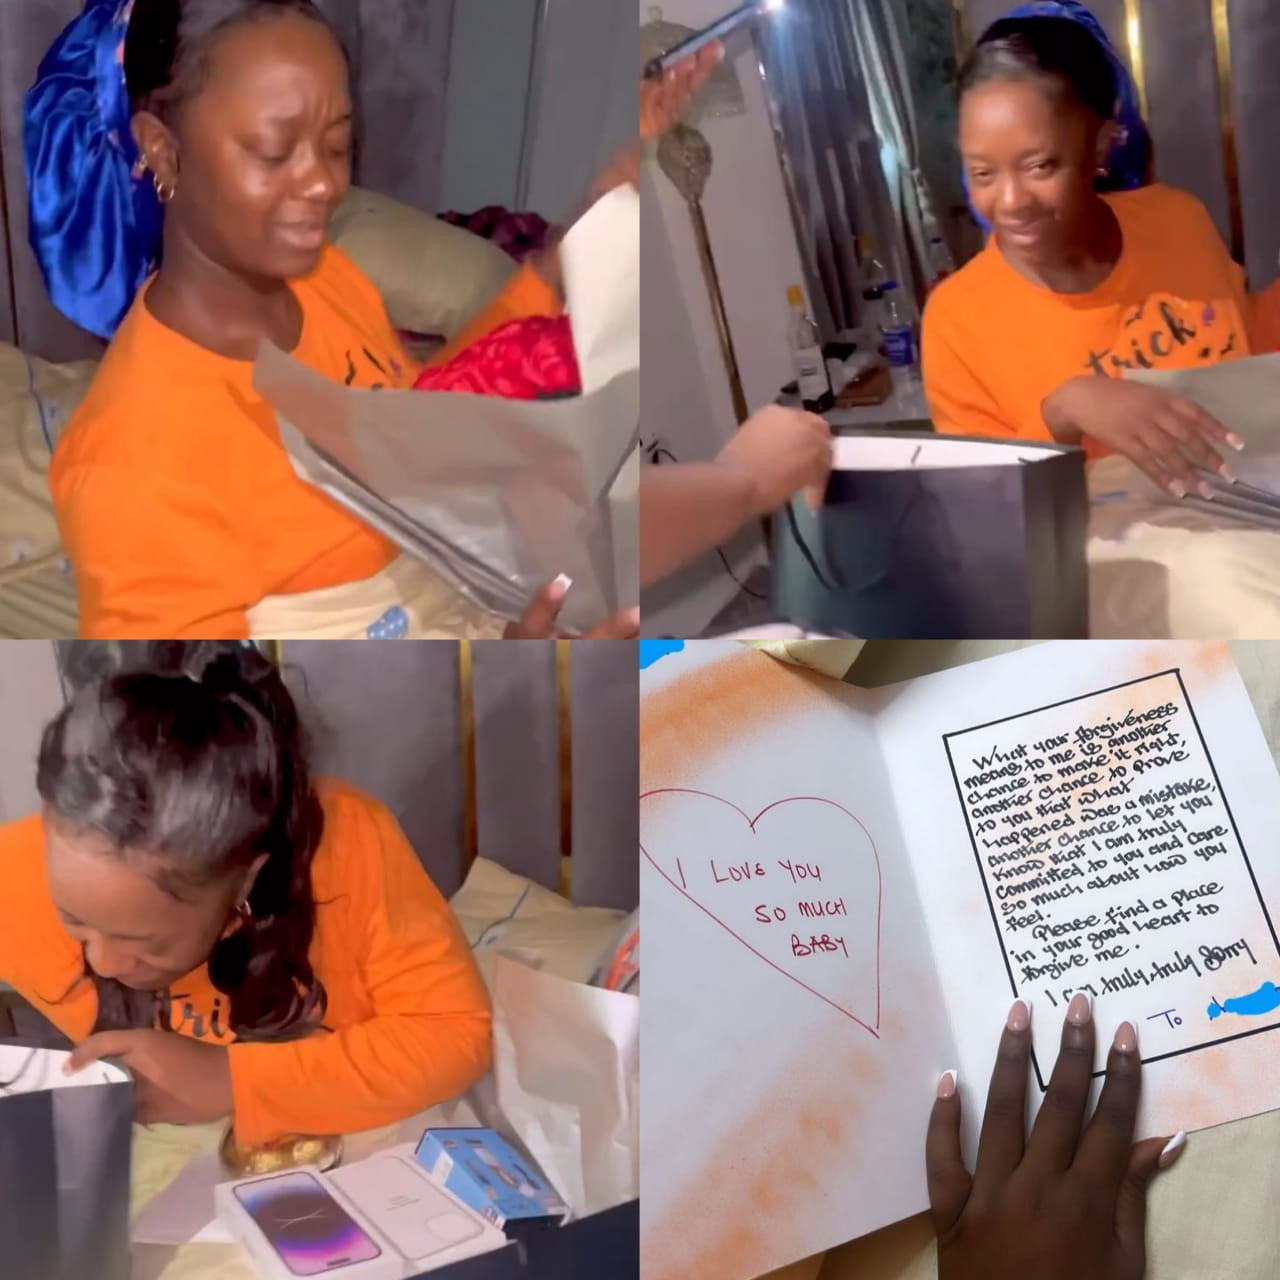 Actress Luchy Donald shows off the box of chocolates, phone, flowers her boyfriend sent to her just to apologize for offending her (video)